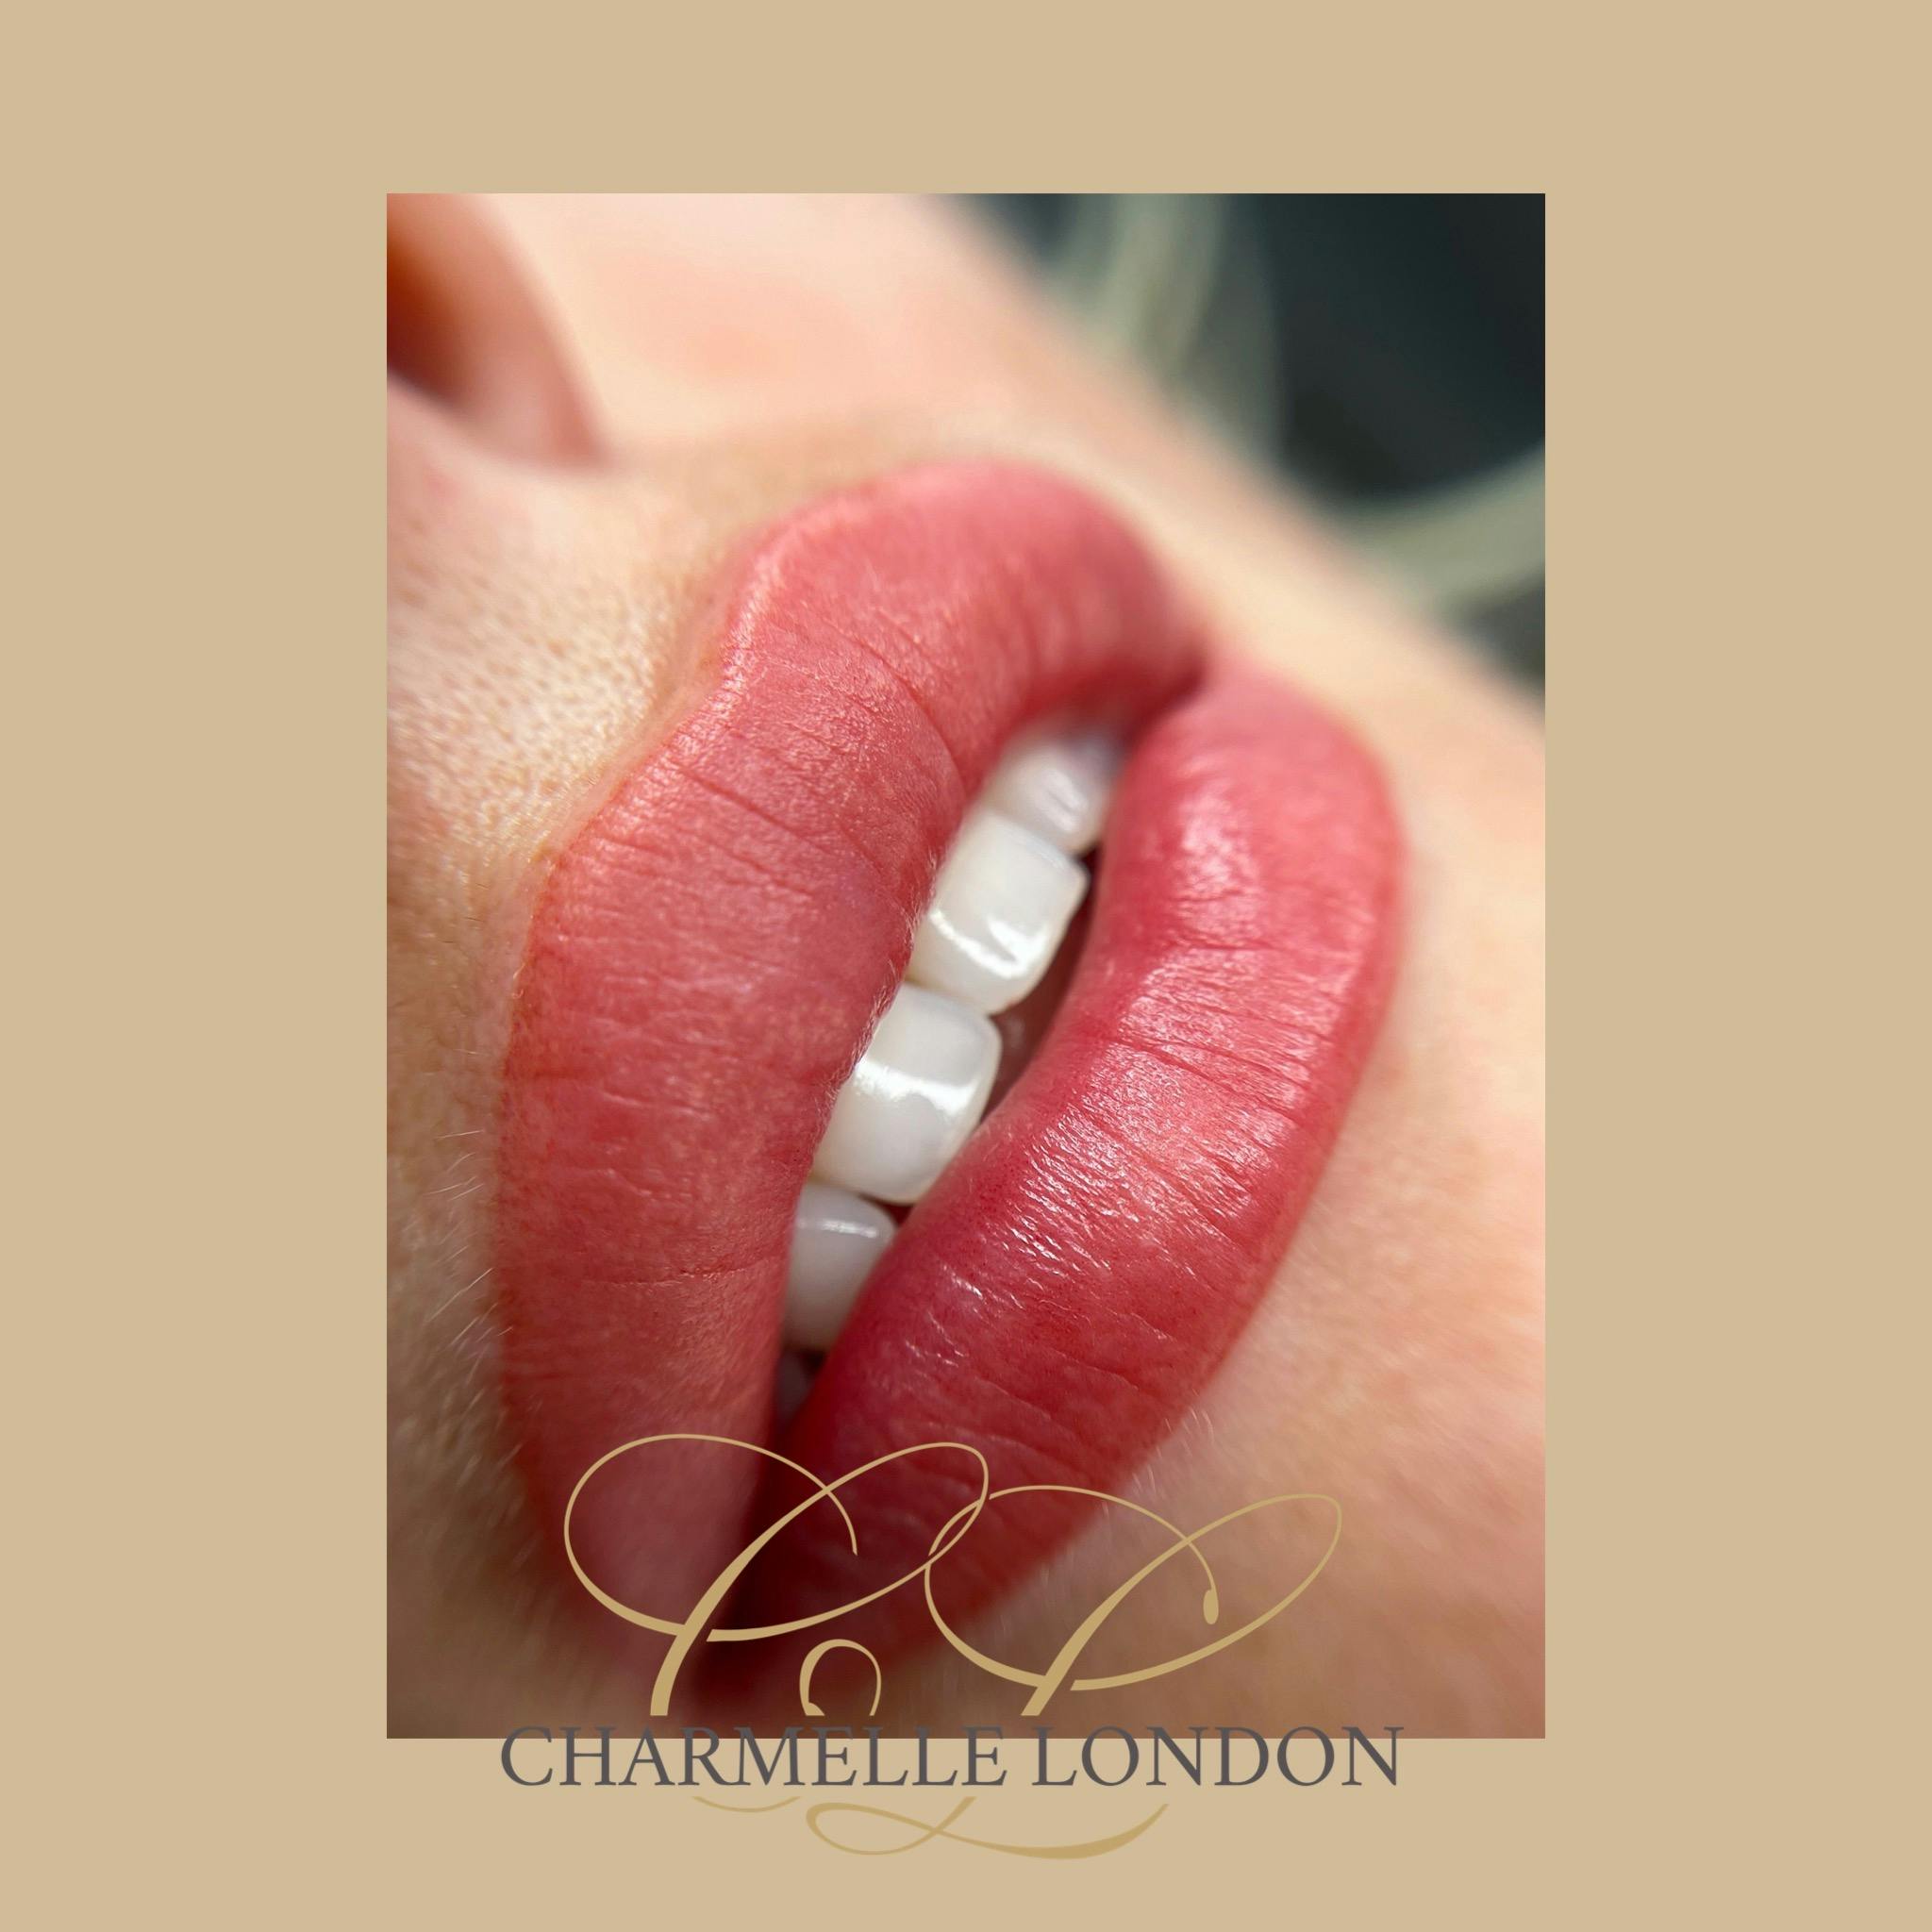 Lips Retouch Keep your look flawless and fresh with our 12-18 months retouch session Call 0333 016 3500 to book today.